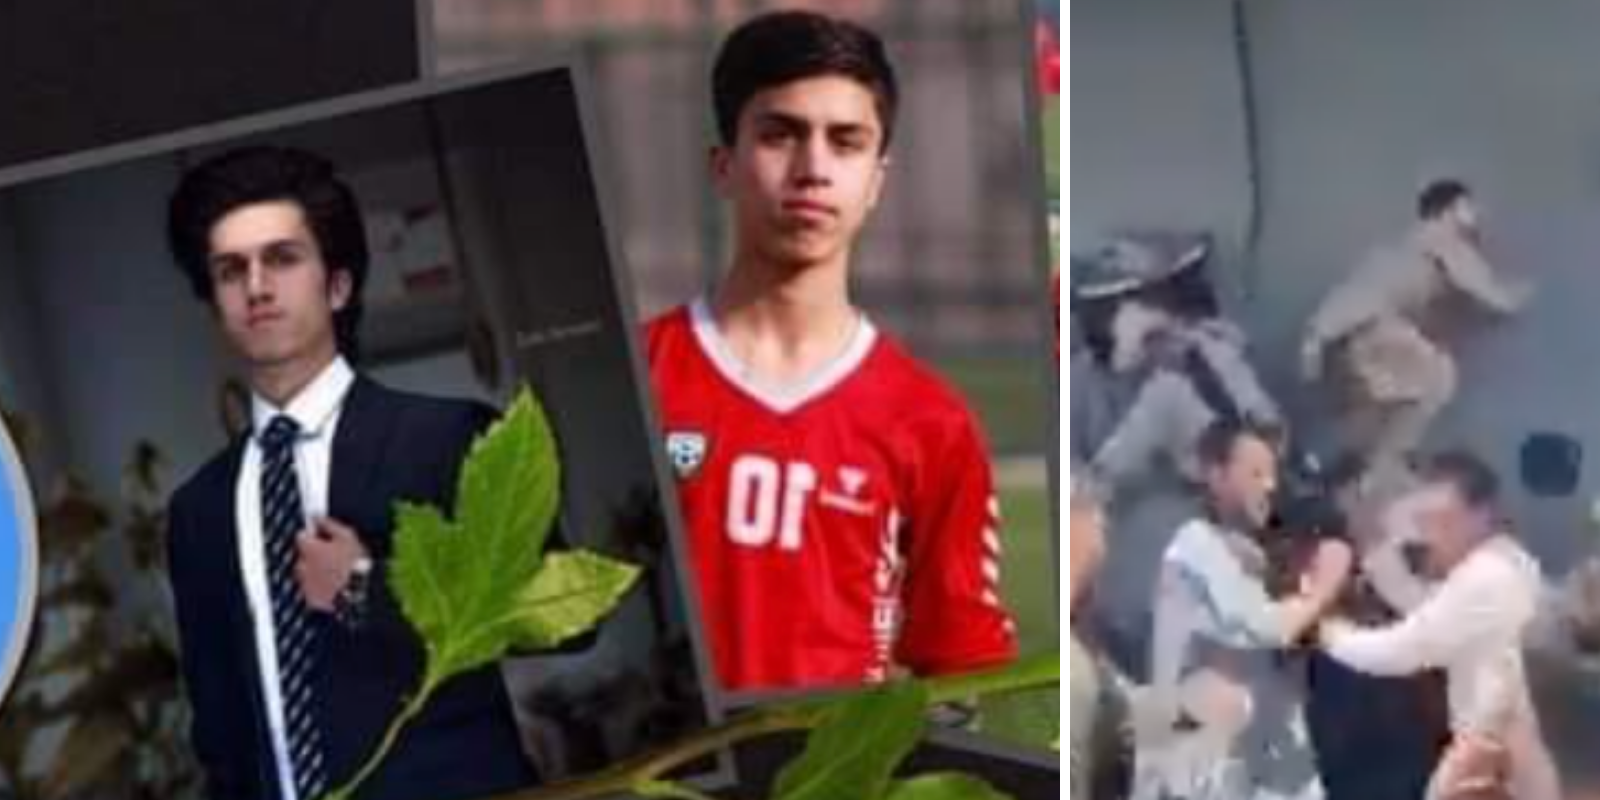 Afghan youth soccer player fell to his death after clinging to US evacuation aircraft